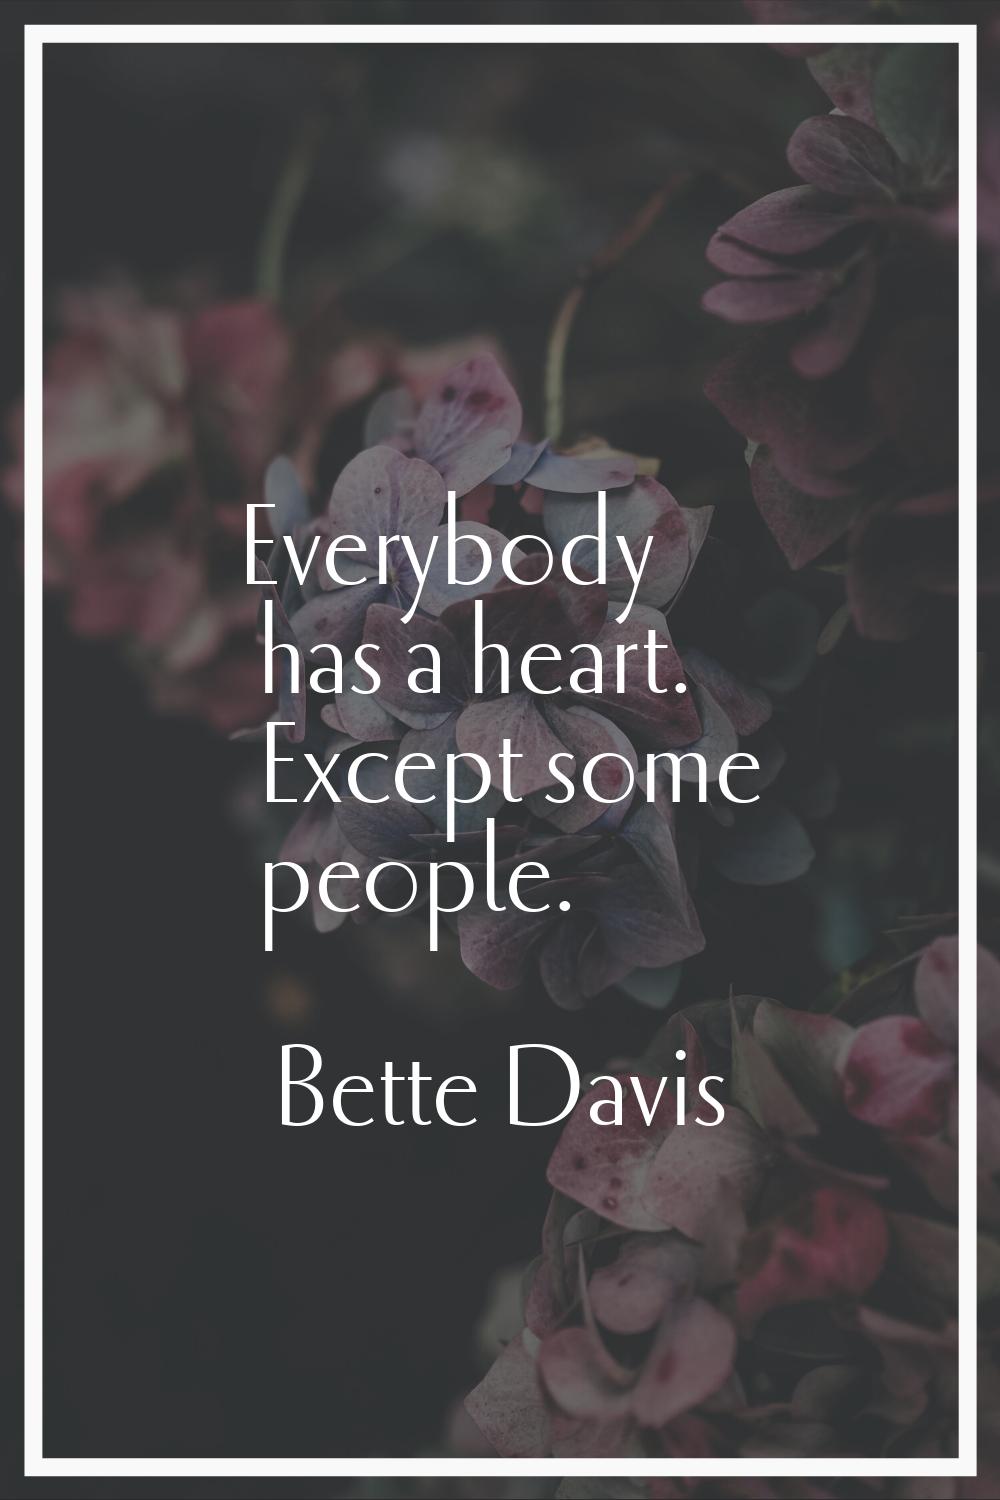 Everybody has a heart. Except some people.